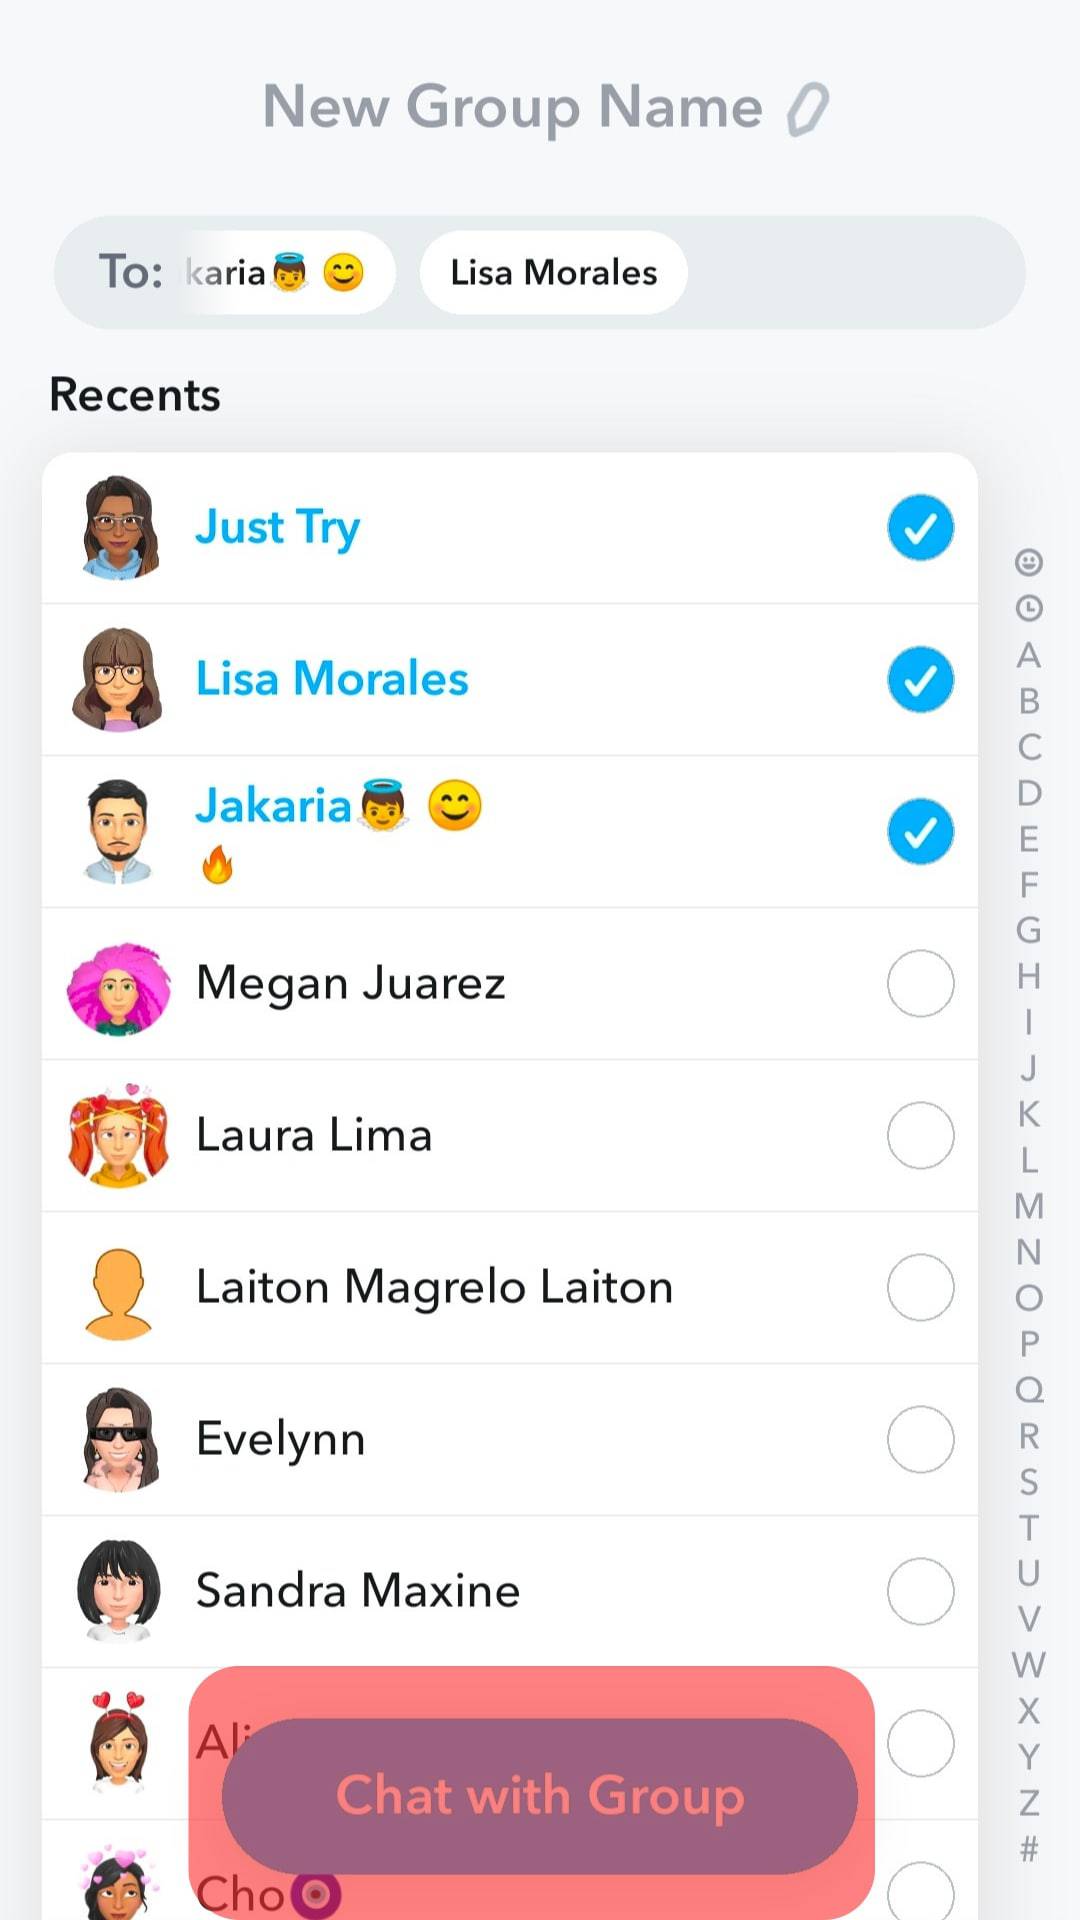 Tap On The 'Chat With Group' Option